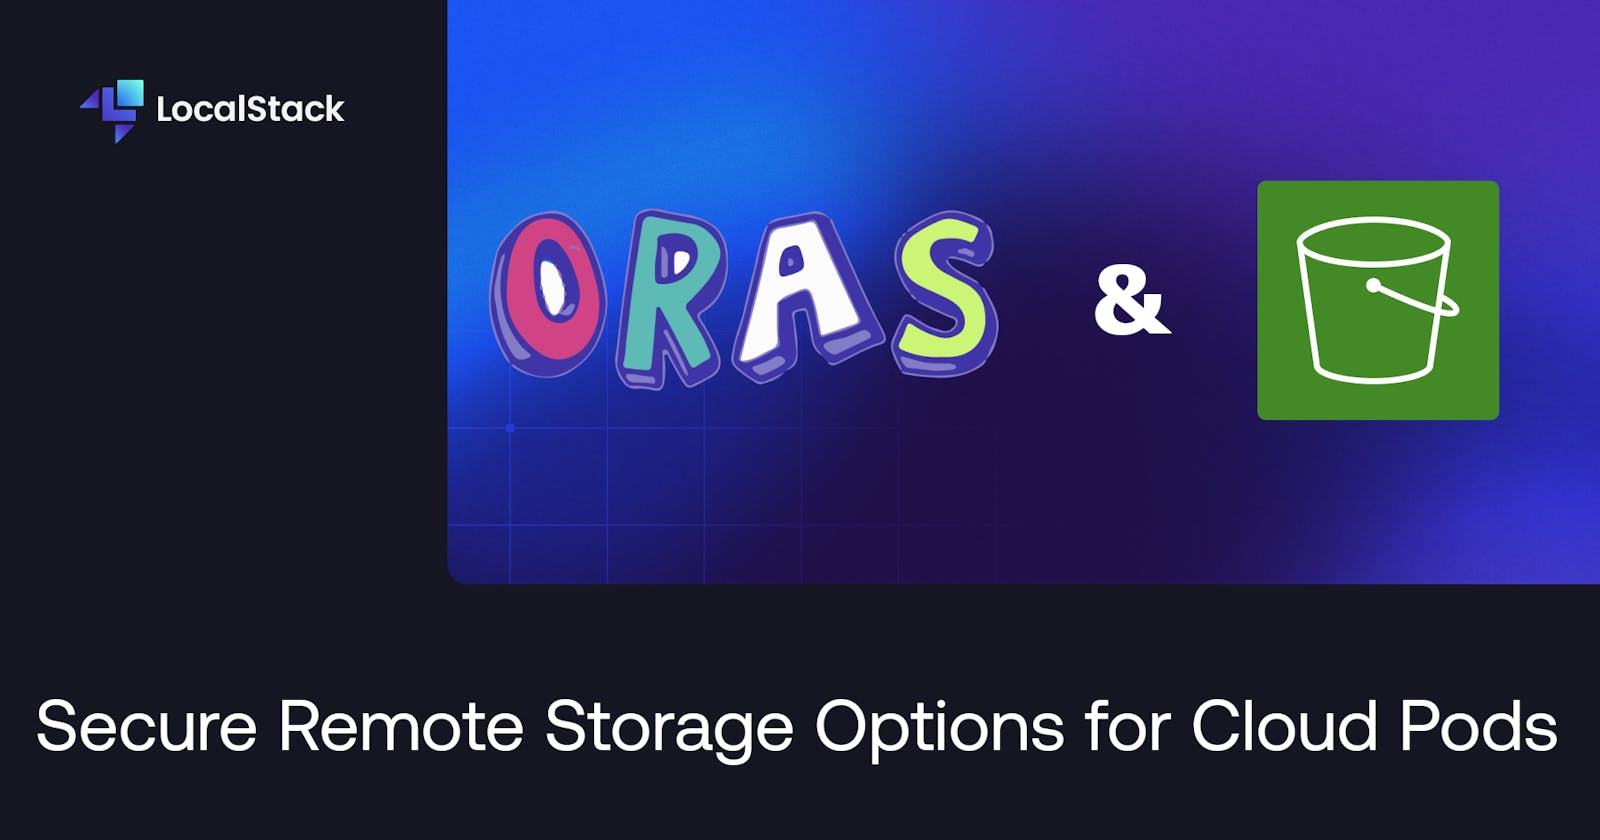 More Remote Storage Options for Your Cloud Pods